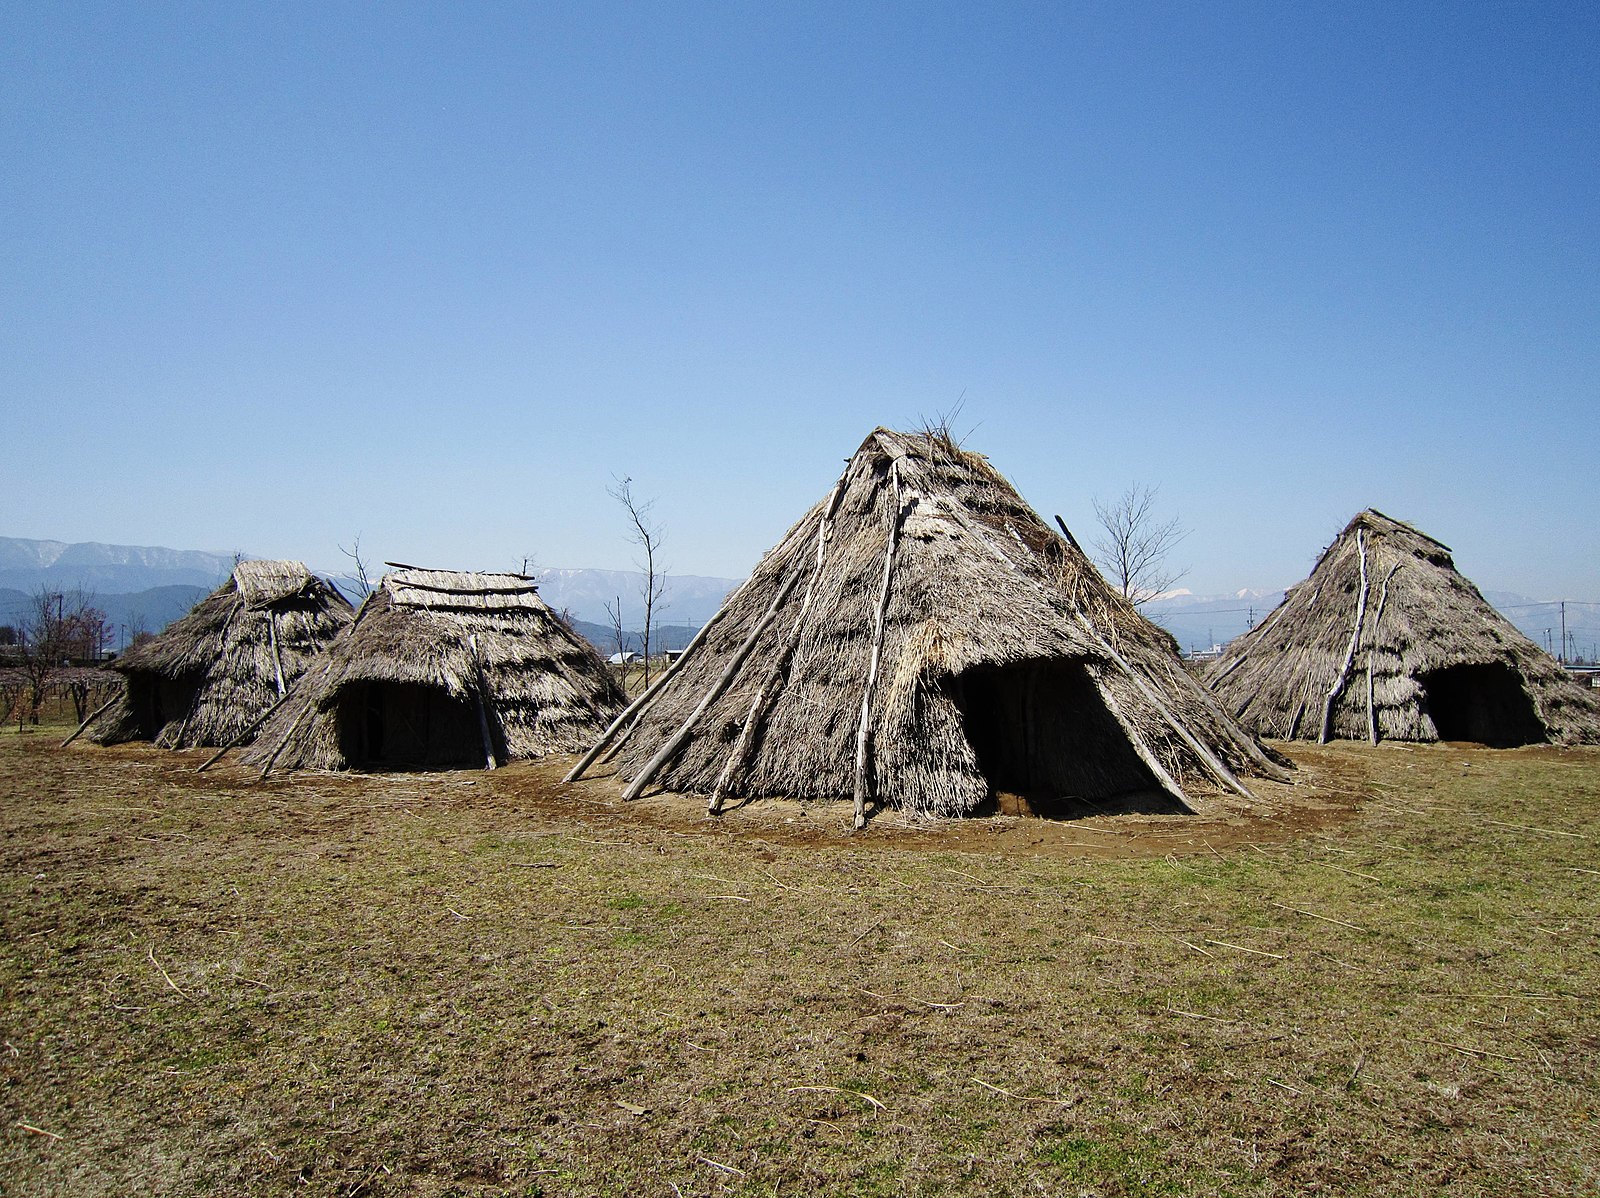 Hira-ide_Historic_Site_Park_reconstructed_Jomon_period_(3000_BC)_houses.jpg